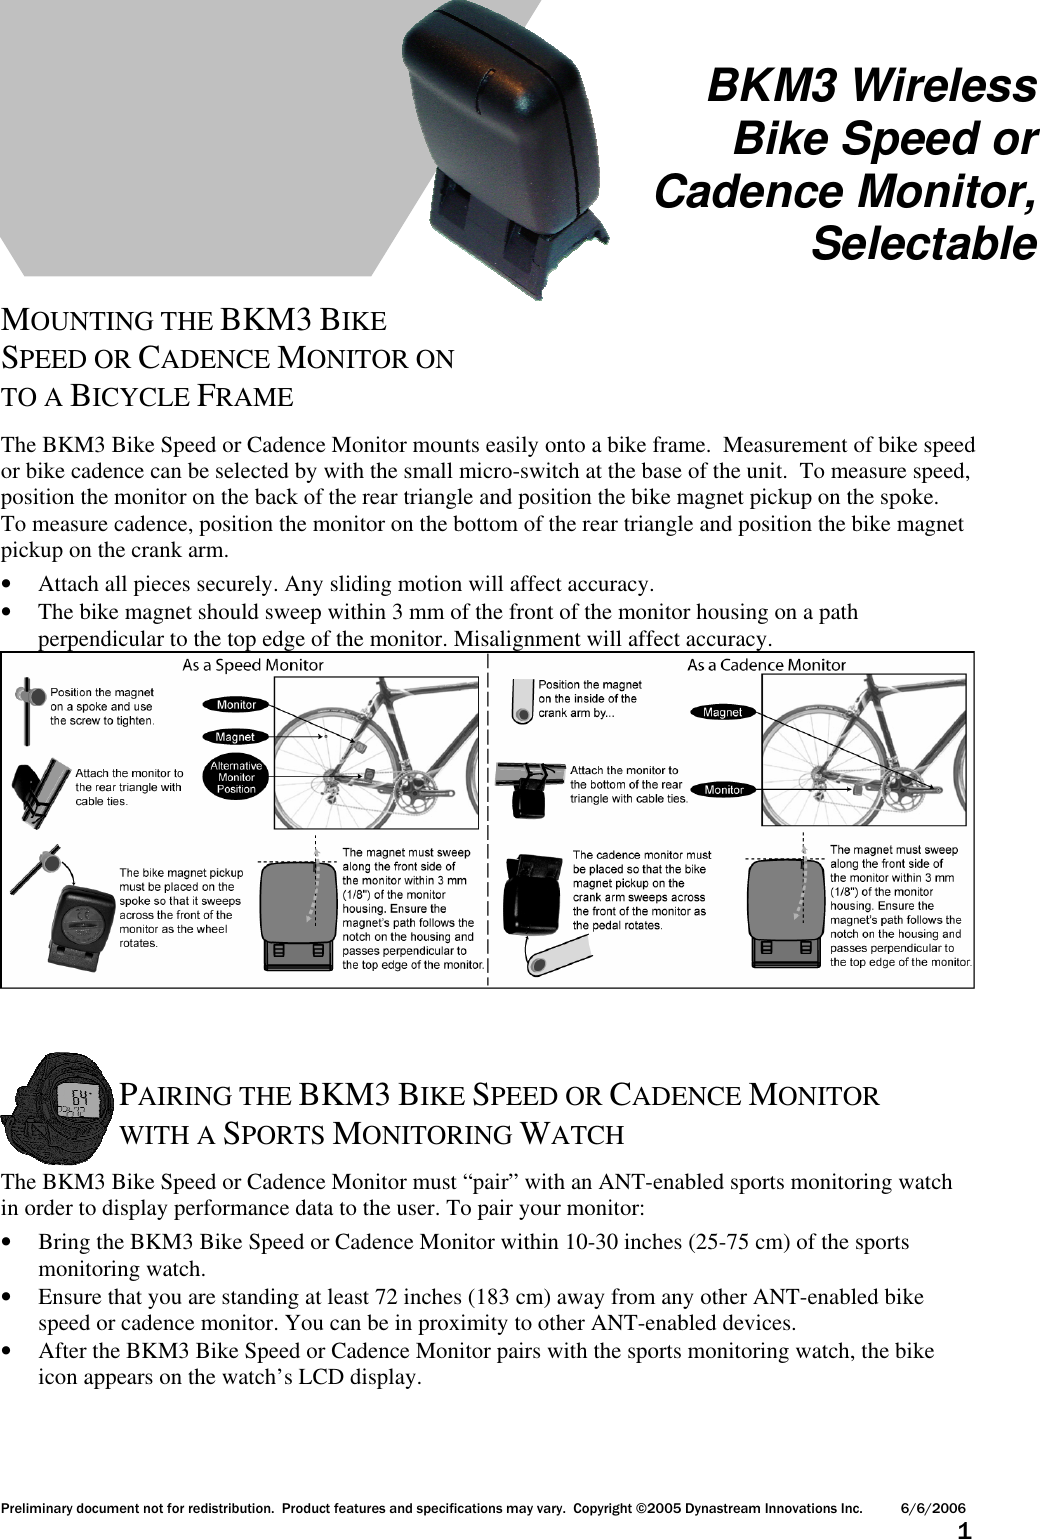 Preliminary document not for redistribution.  Product features and specifications may vary.  Copyright ©2005 Dynastream Innovations Inc. 6/6/2006                      1      MOUNTING THE BKM3 BIKE SPEED OR CADENCE MONITOR ON TO A BICYCLE FRAME  The BKM3 Bike Speed or Cadence Monitor mounts easily onto a bike frame.  Measurement of bike speed or bike cadence can be selected by with the small micro-switch at the base of the unit.  To measure speed, position the monitor on the back of the rear triangle and position the bike magnet pickup on the spoke.  To measure cadence, position the monitor on the bottom of the rear triangle and position the bike magnet pickup on the crank arm. • Attach all pieces securely. Any sliding motion will affect accuracy. • The bike magnet should sweep within 3 mm of the front of the monitor housing on a path perpendicular to the top edge of the monitor. Misalignment will affect accuracy.     PAIRING THE BKM3 BIKE SPEED OR CADENCE MONITOR WITH A SPORTS MONITORING WATCH  The BKM3 Bike Speed or Cadence Monitor must “pair” with an ANT-enabled sports monitoring watch in order to display performance data to the user. To pair your monitor: • Bring the BKM3 Bike Speed or Cadence Monitor within 10-30 inches (25-75 cm) of the sports monitoring watch. • Ensure that you are standing at least 72 inches (183 cm) away from any other ANT-enabled bike speed or cadence monitor. You can be in proximity to other ANT-enabled devices. • After the BKM3 Bike Speed or Cadence Monitor pairs with the sports monitoring watch, the bike icon appears on the watch’s LCD display.    BKM3 Wireless Bike Speed or Cadence Monitor, Selectable 